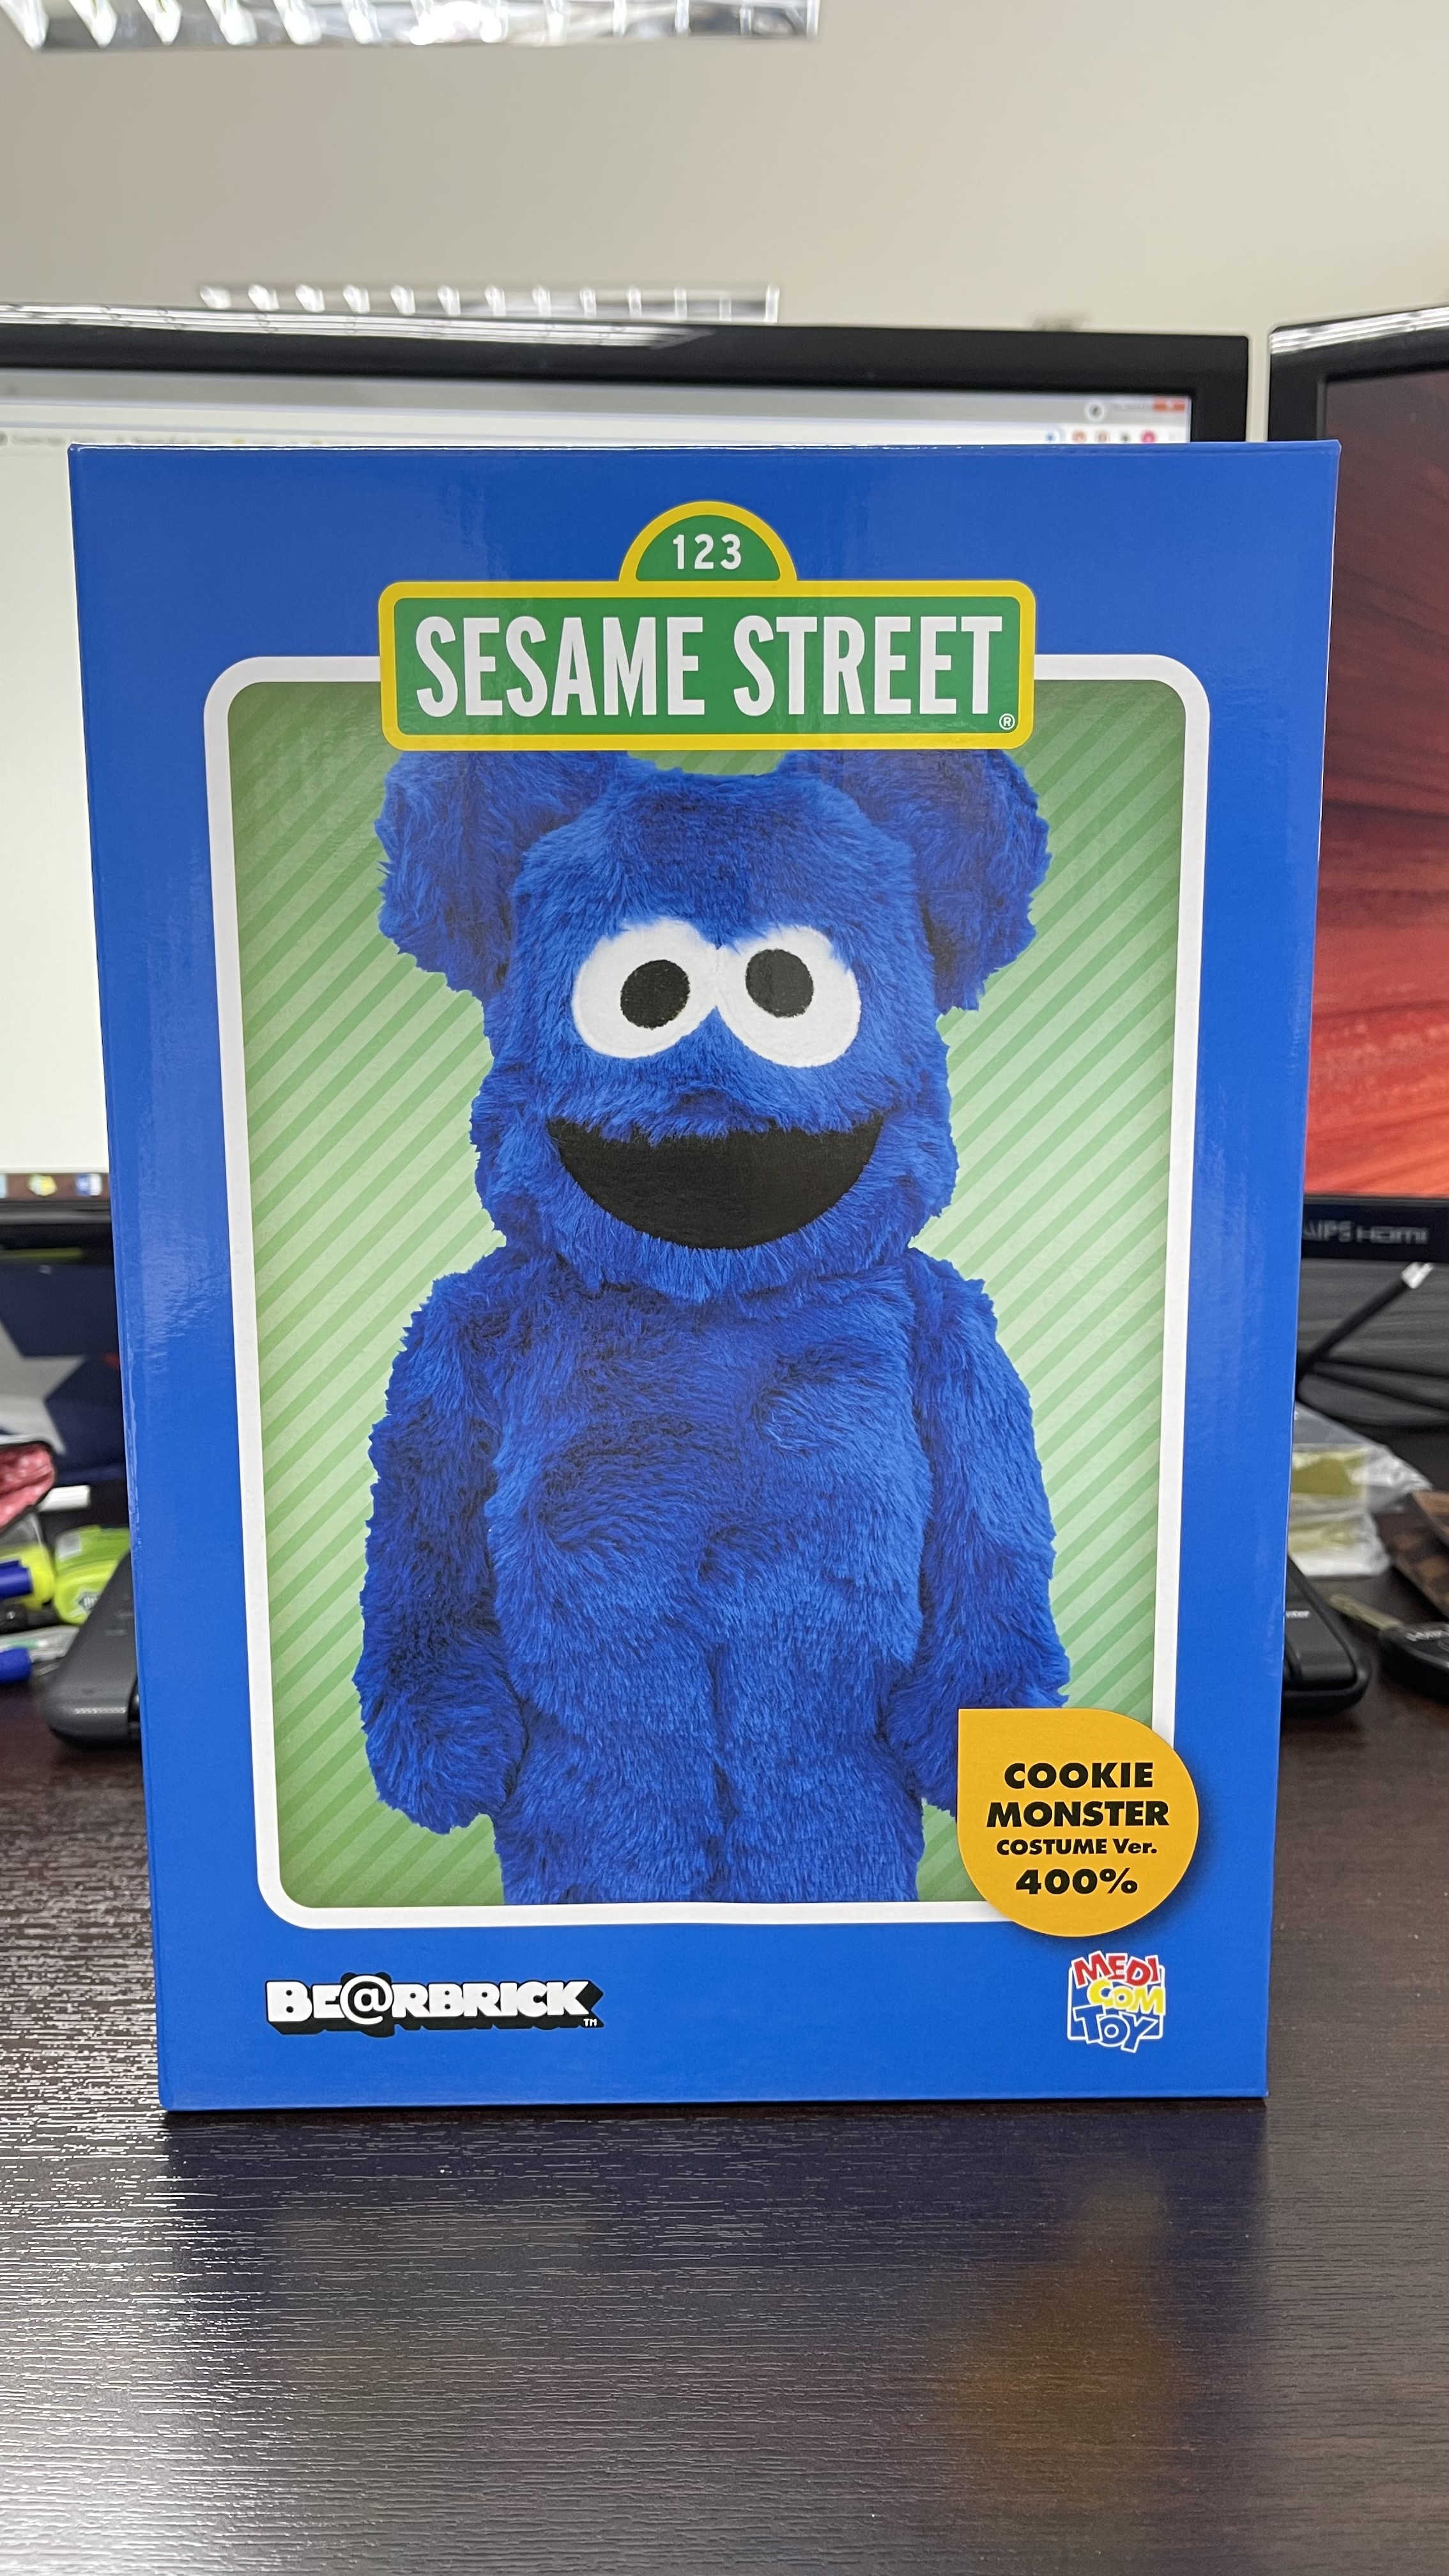 BE@RBRICK COOKIE MONSTER Costume 400％エンタメ/ホビー - その他